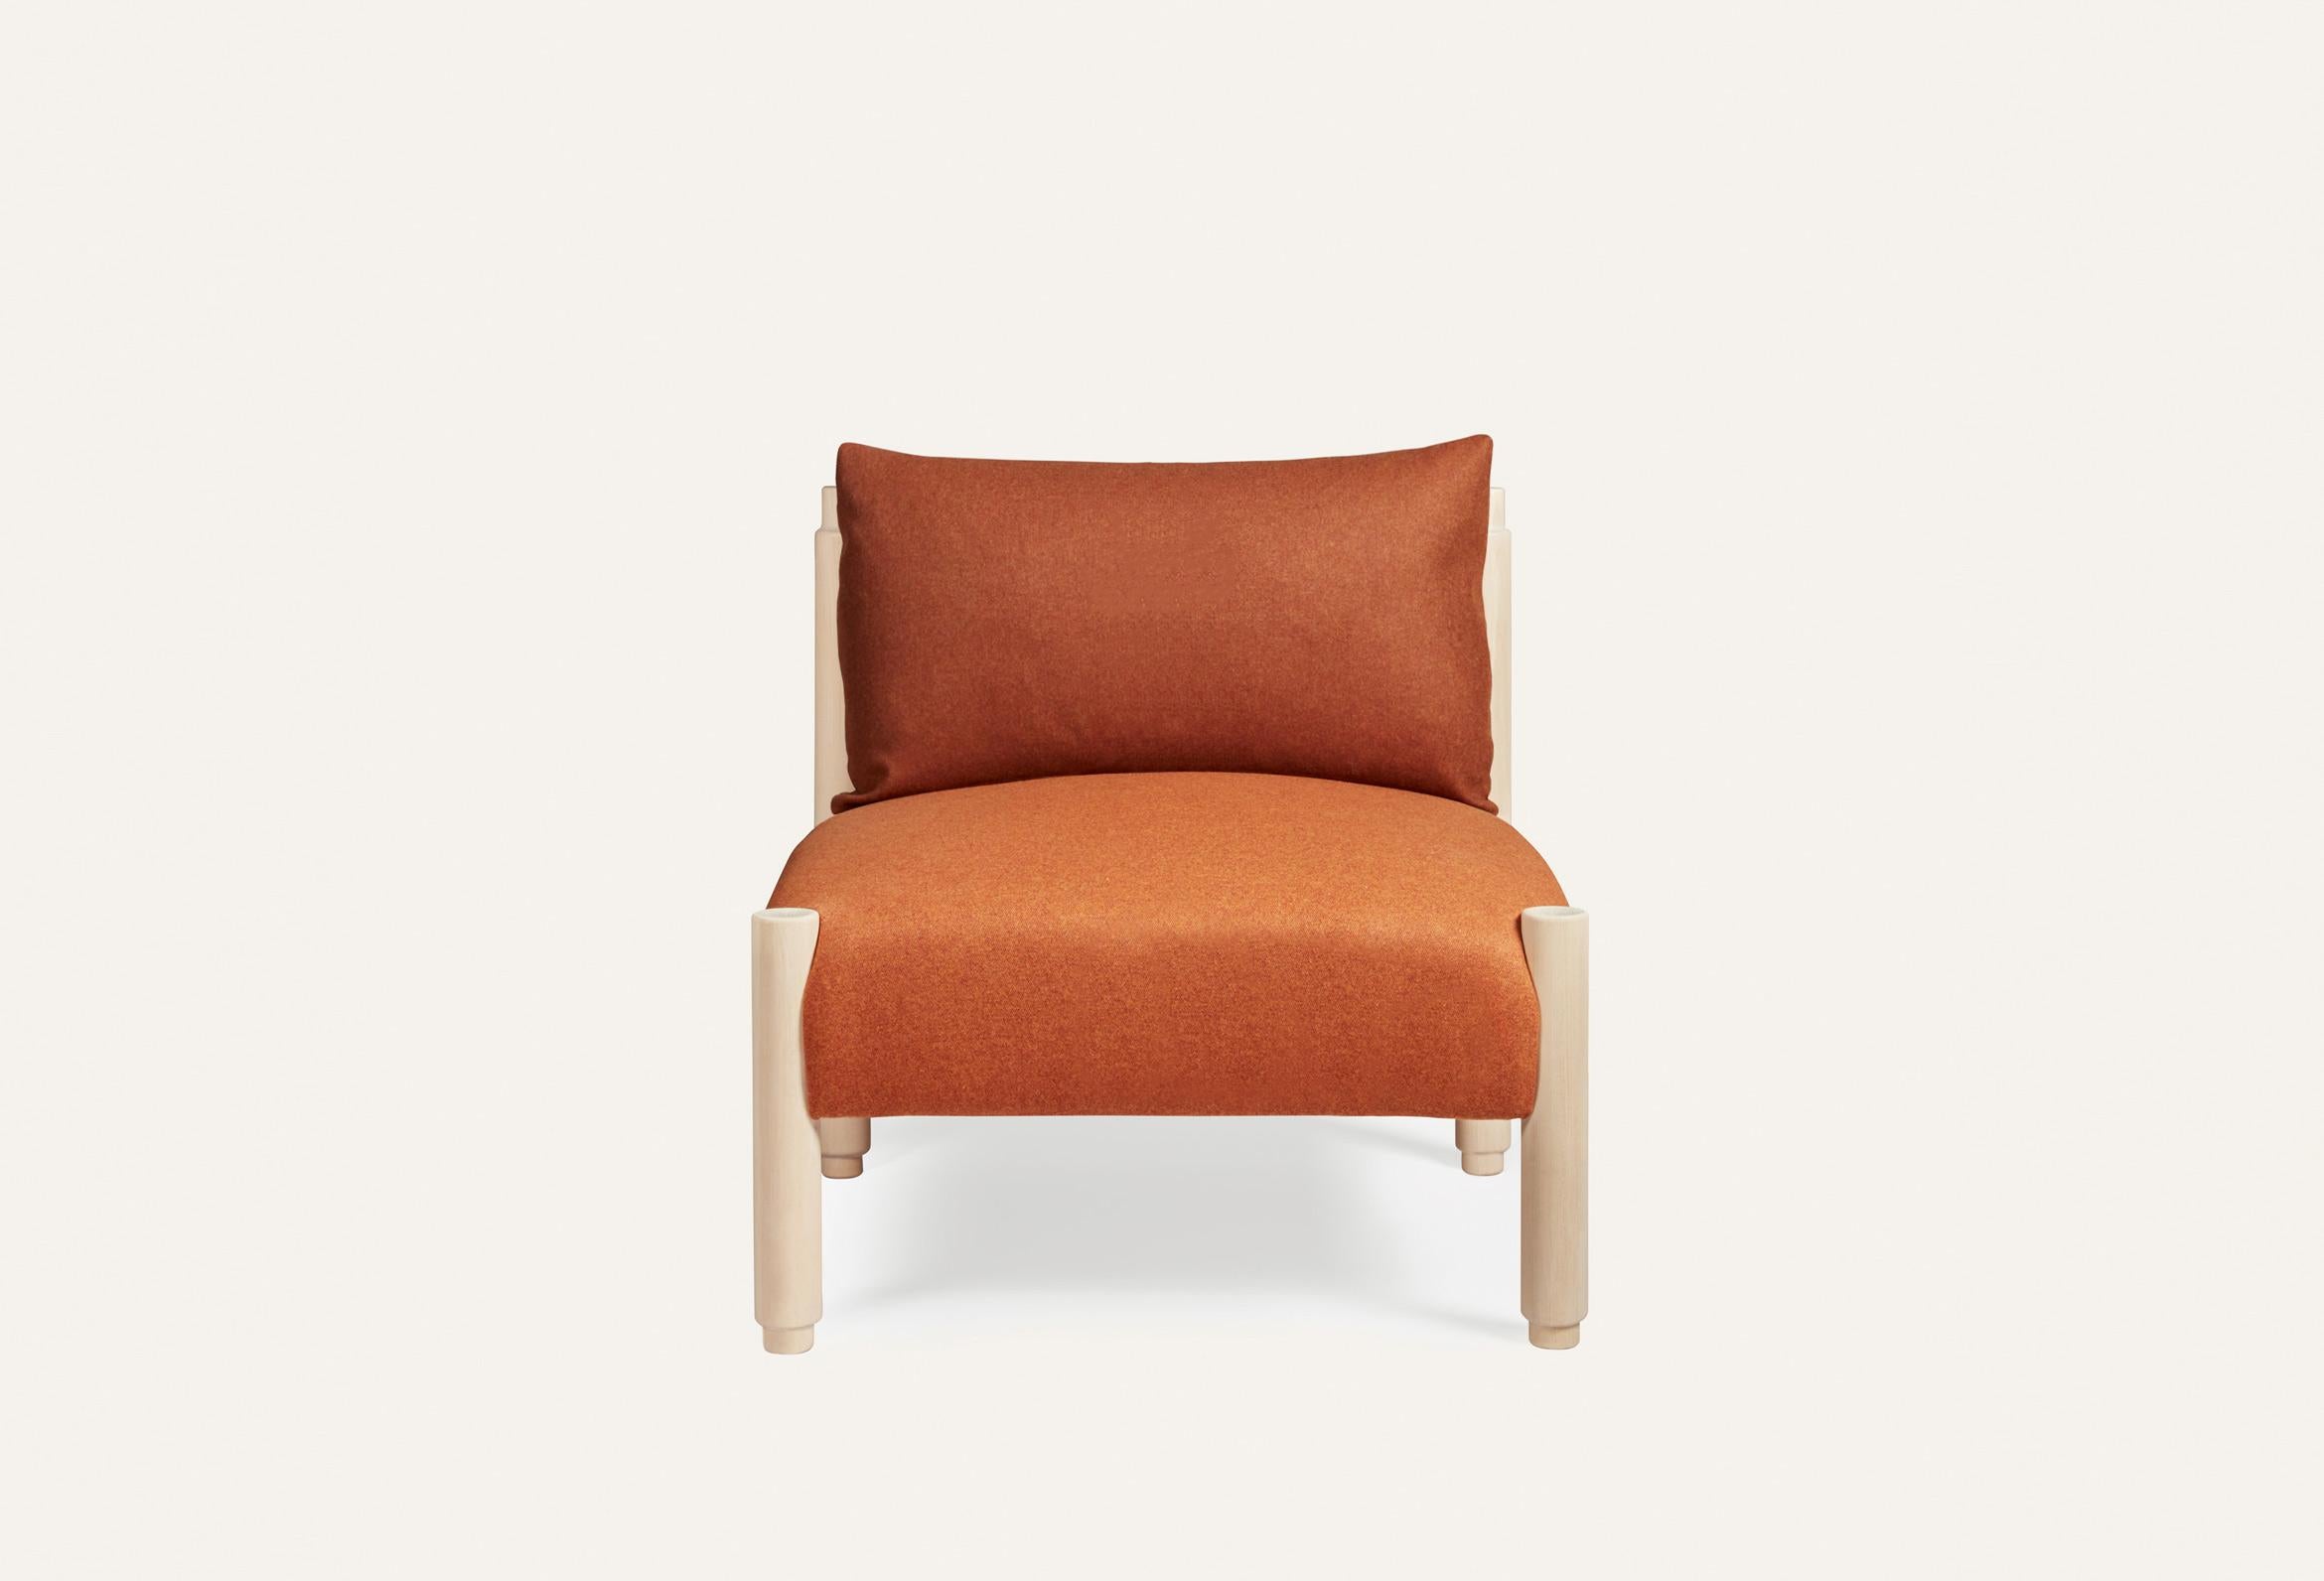 Swedish Natural and Orange Stand by Me Sofa with Pillows by Storängen Design For Sale